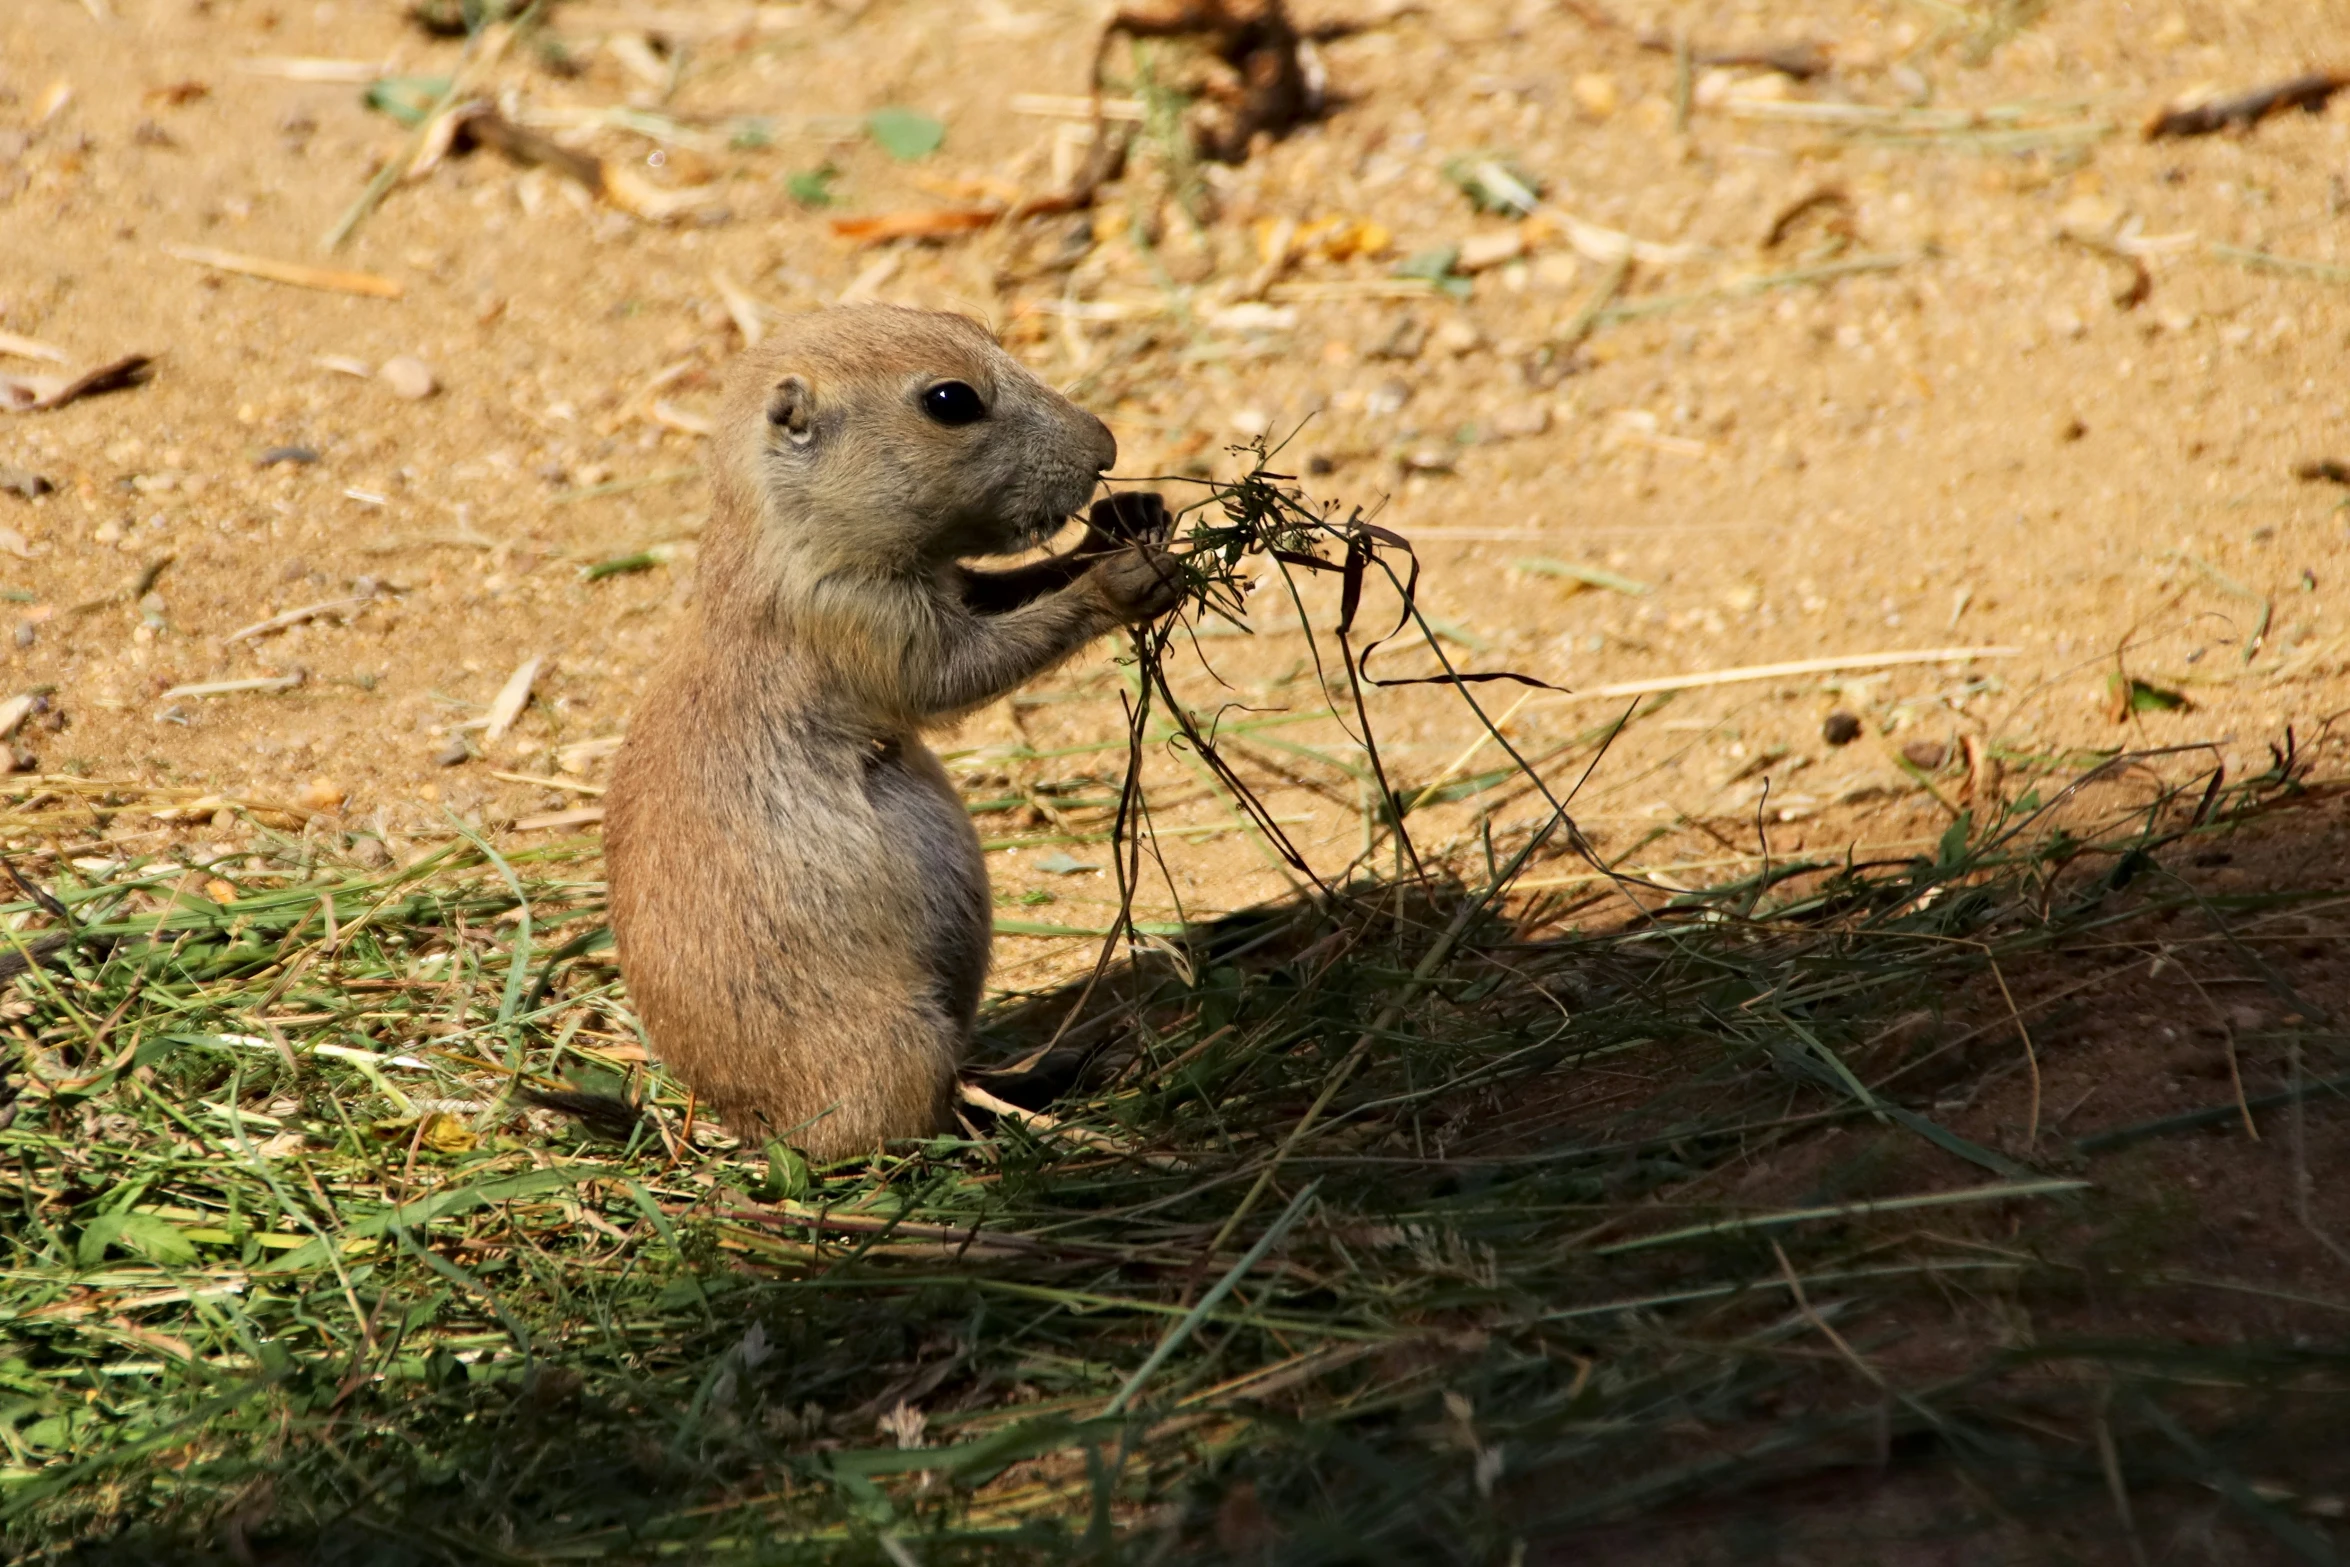 a ground squirrel holds its front paws and looks at the camera